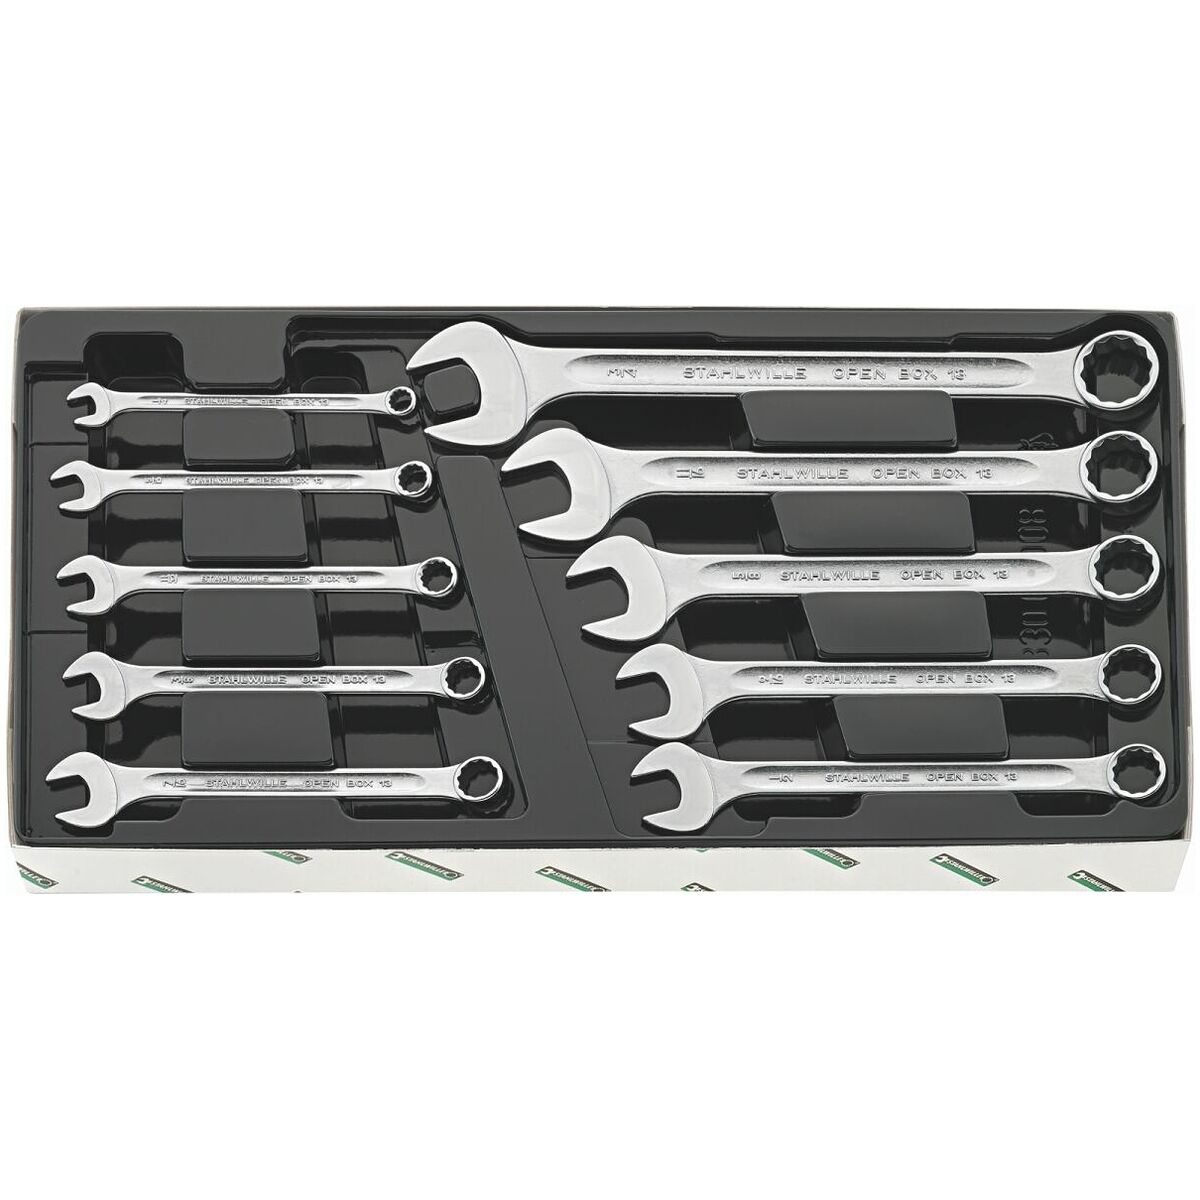 Stahlwille 96830164 Combination Wrench Set - 17 Pieces, Chrome Alloy &  Chrome-plated, TCS Inlays, Sizes 6mm to 24mm, Made in Germany: Amazon.com:  Tools & Home Improvement